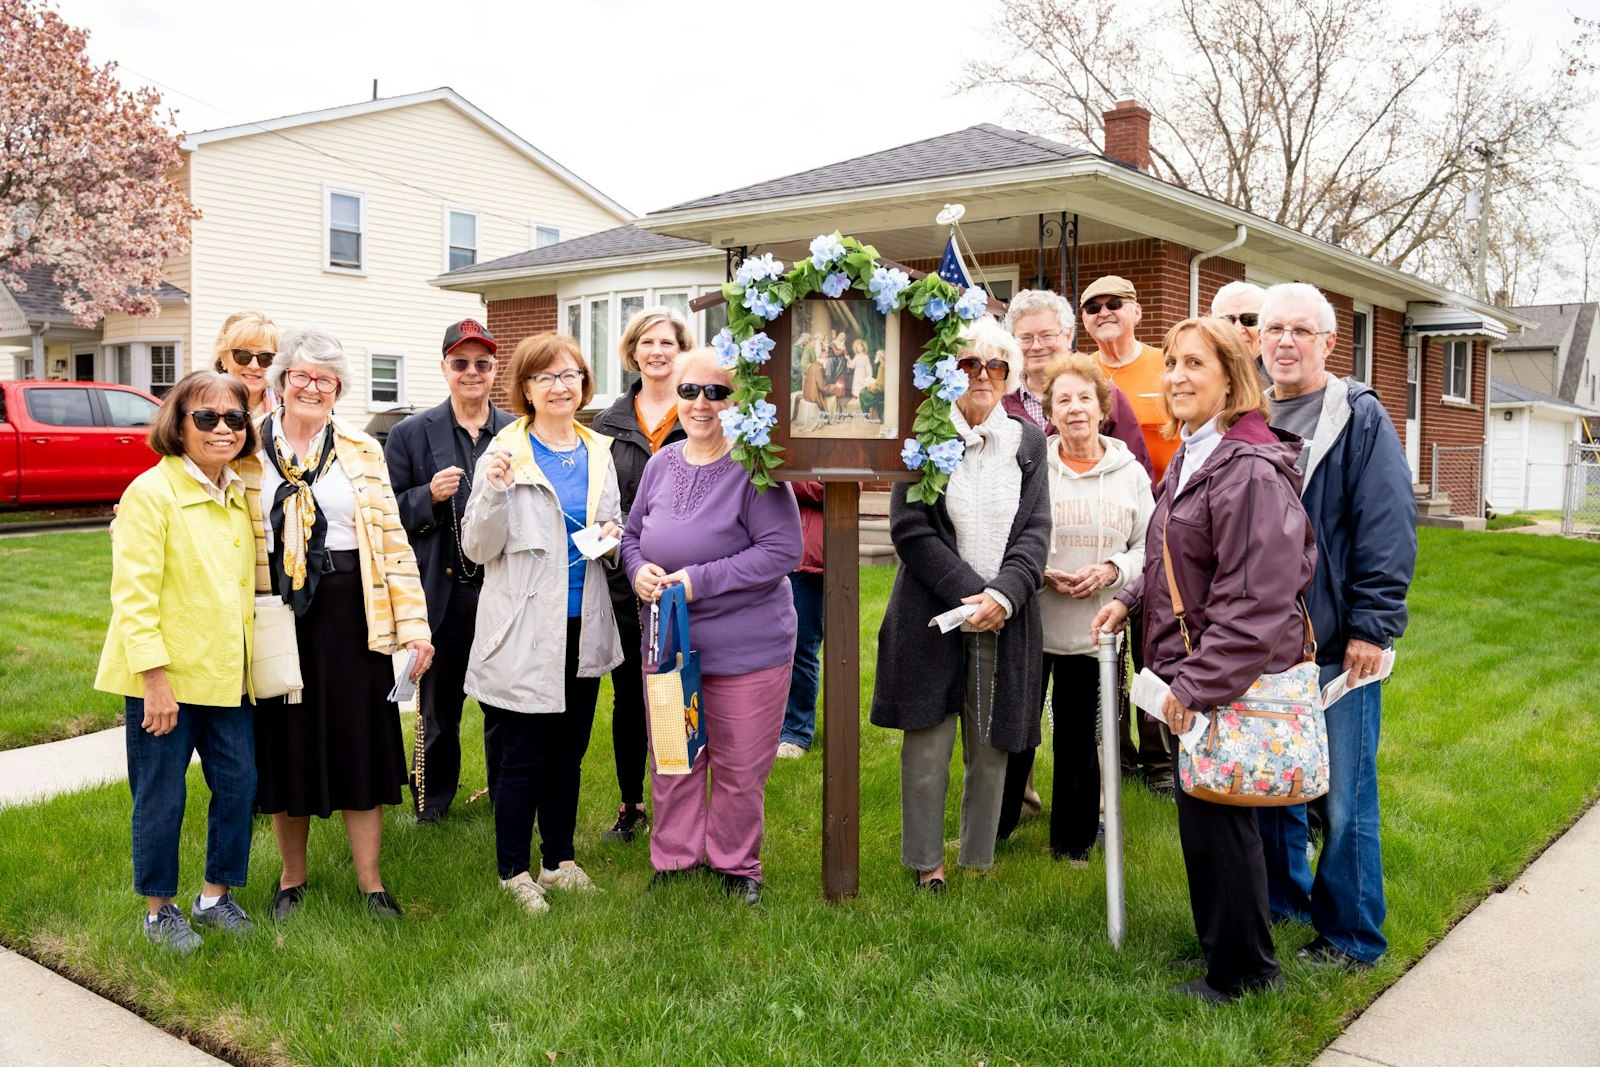 A group of Our Lady of the Scapular parishioners poses in front of one of the "rosary box" stations hosted in a parishioner's front yard along the pilgrimage route. The group is making weekly rosary pilgrimages throughout May.